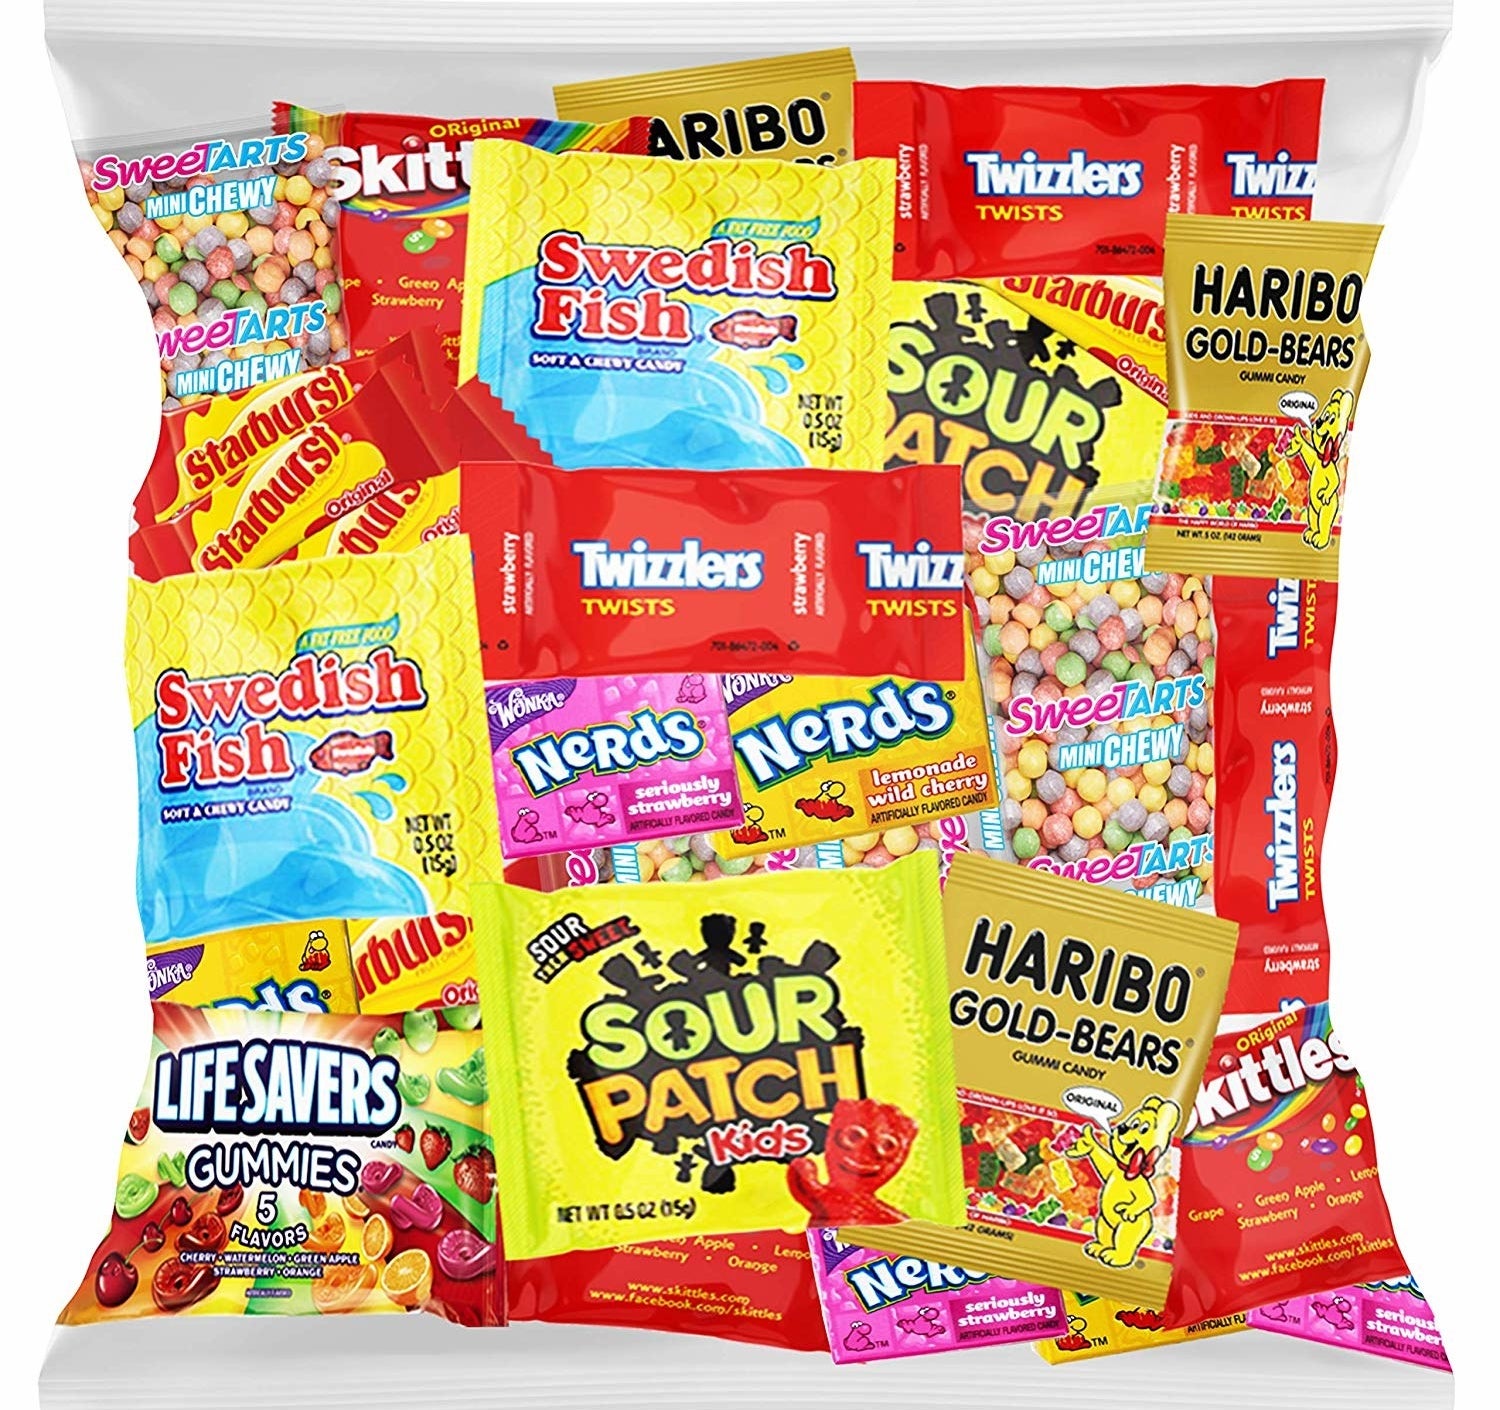 mix of fruity snacks like swedish fish, nerds, and sour patch kids